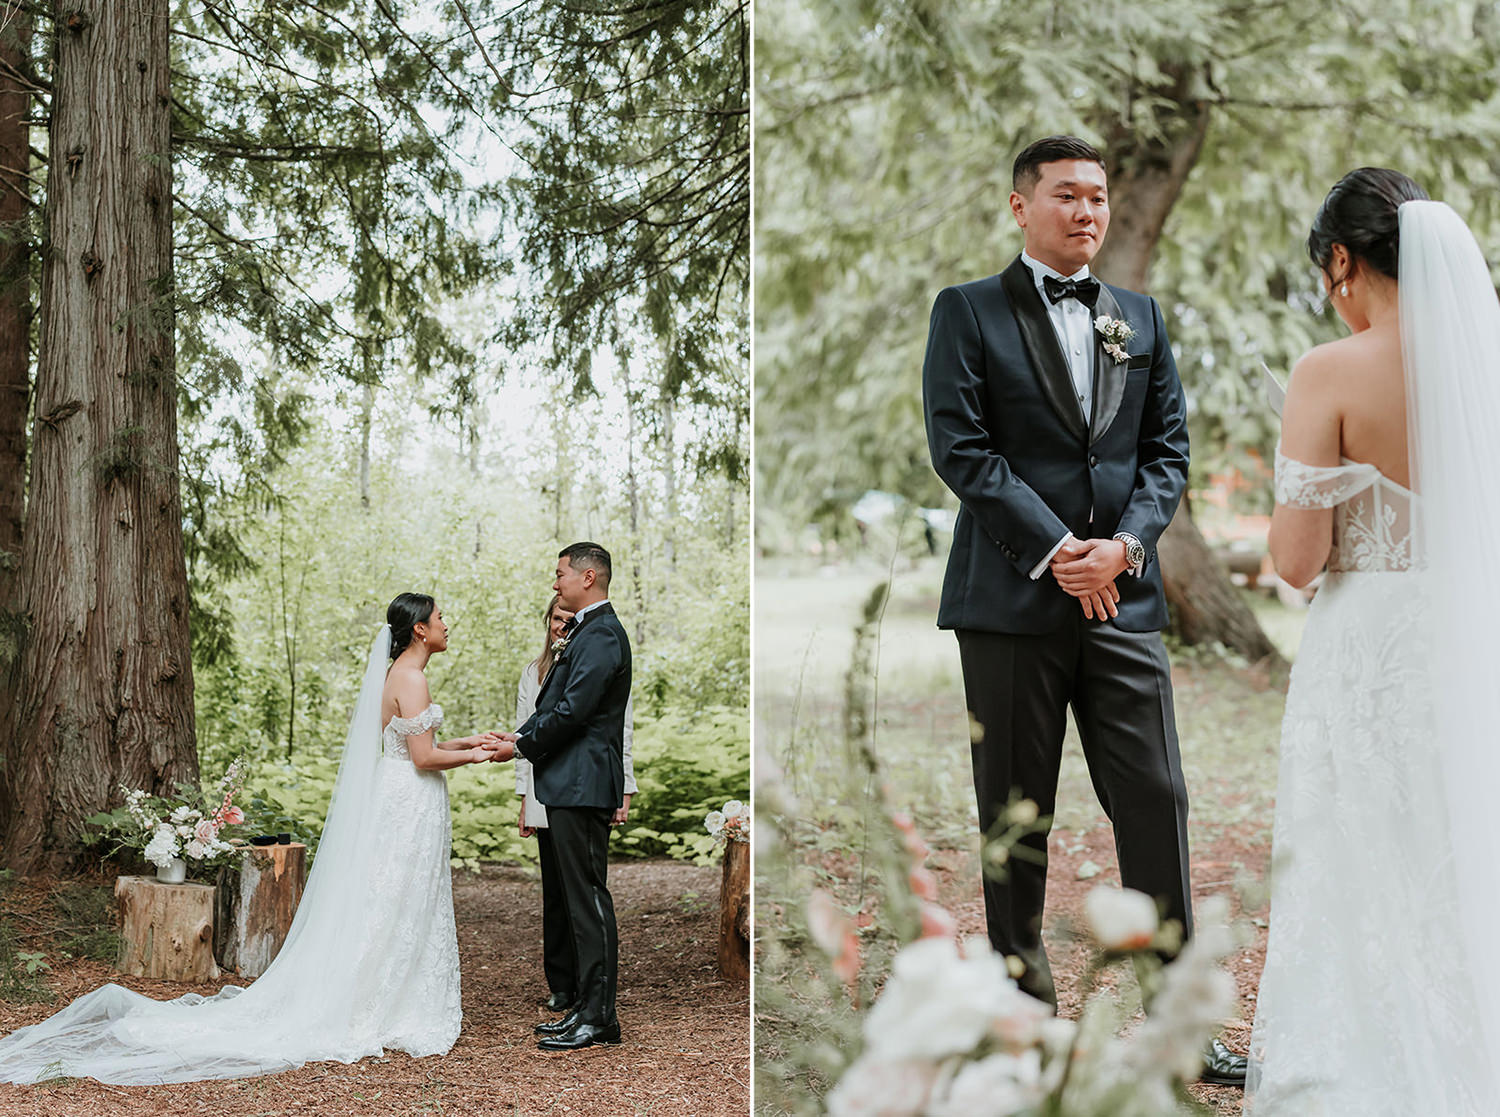 Pemberton wedding ceremony in the forest